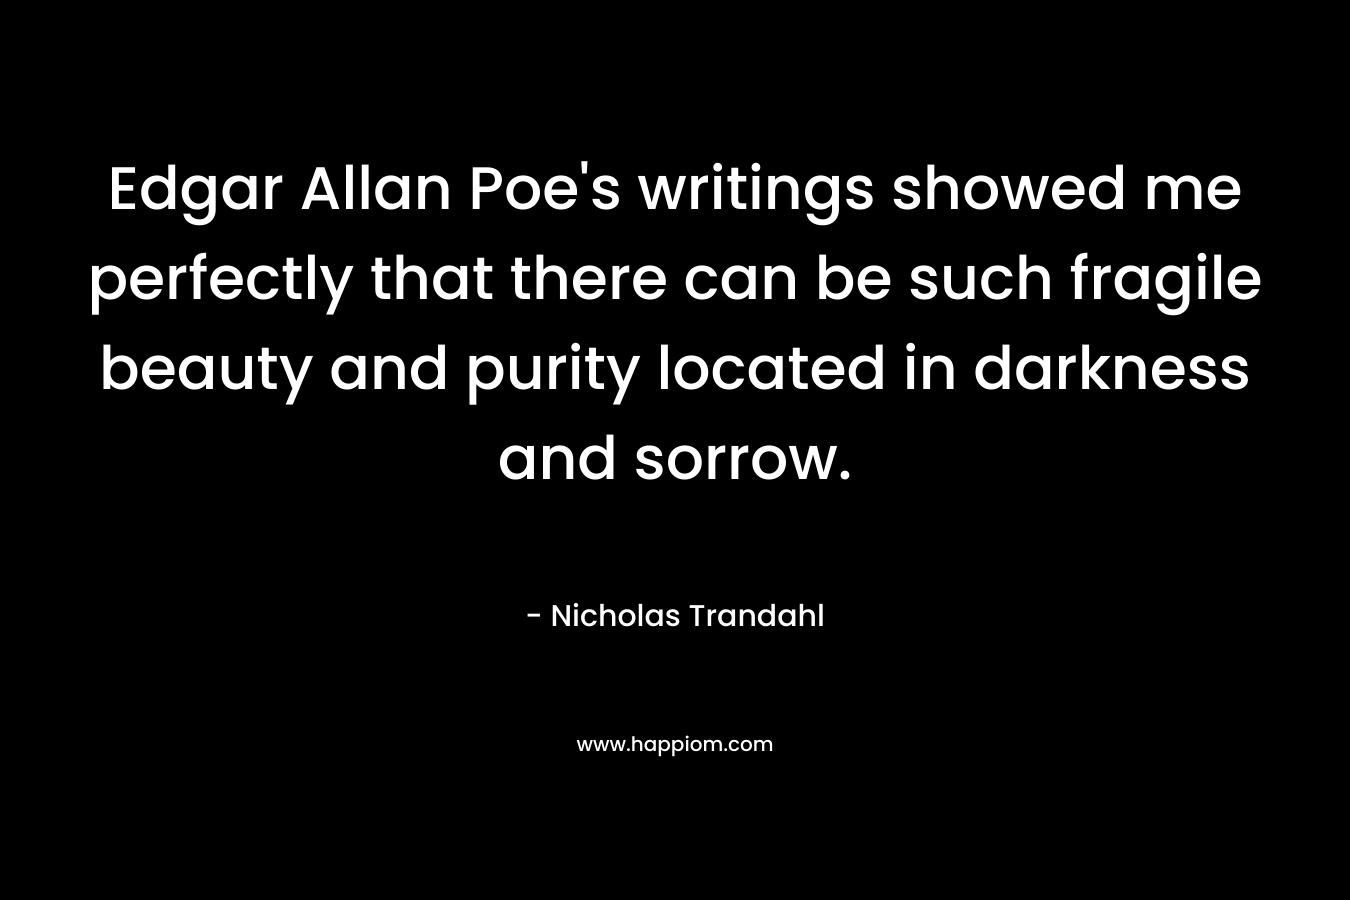 Edgar Allan Poe’s writings showed me perfectly that there can be such fragile beauty and purity located in darkness and sorrow. – Nicholas Trandahl